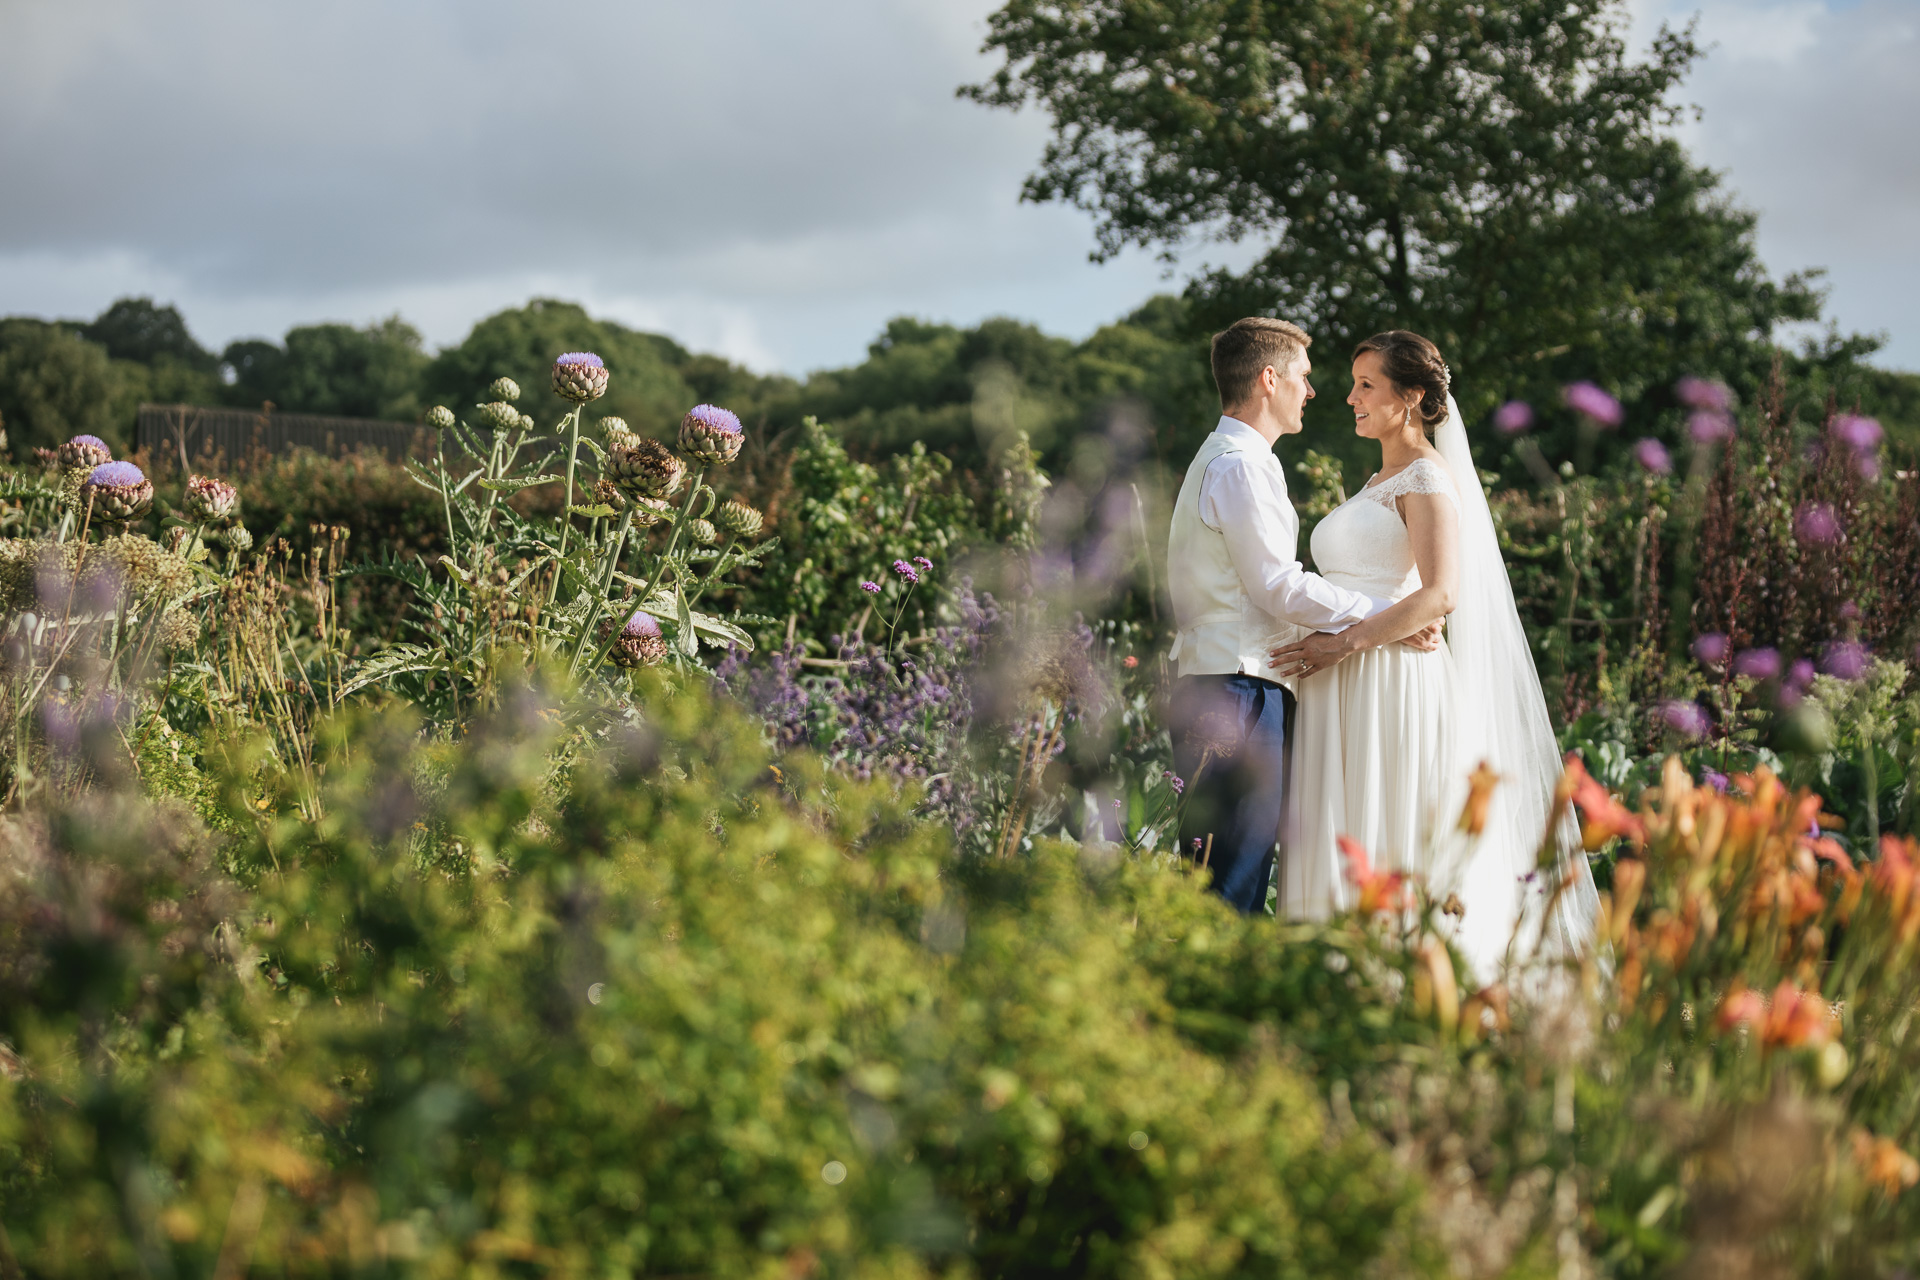 A bride and groom together in a kitchen garden surrounded by flowers and plants. 